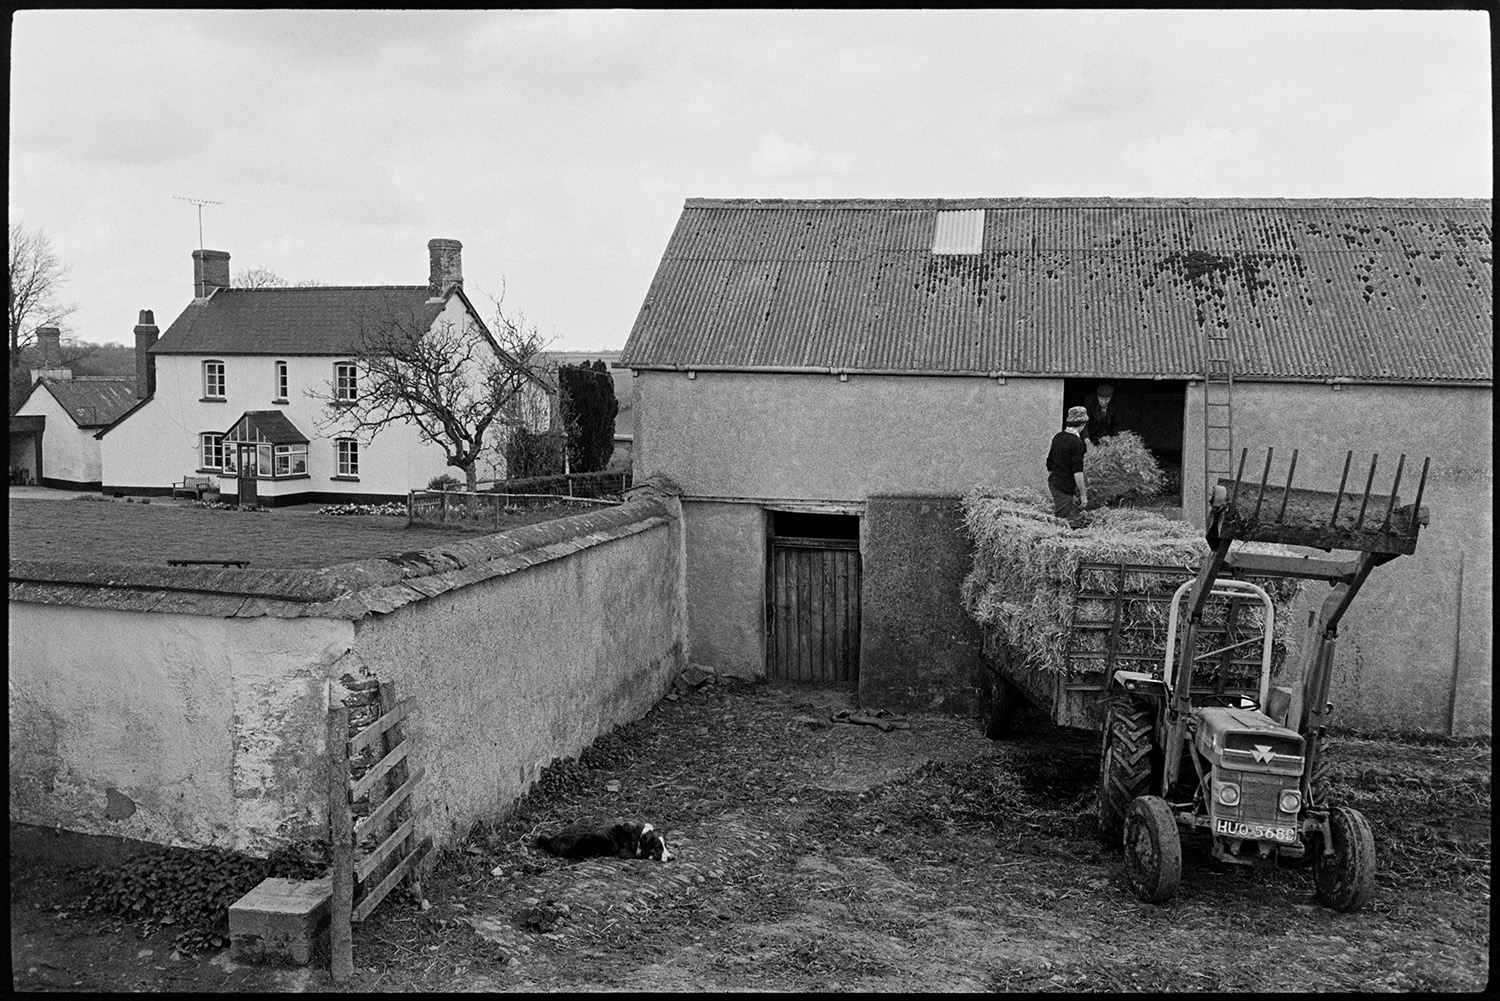 Loading hay into barn tallet. 
[David Ward and another man loading hay bales into a barn tallet from a tractor and trailer at Parsonage, Iddesleigh, A dog is laying down in the farmyard and the farmhouse is visible in the background.]